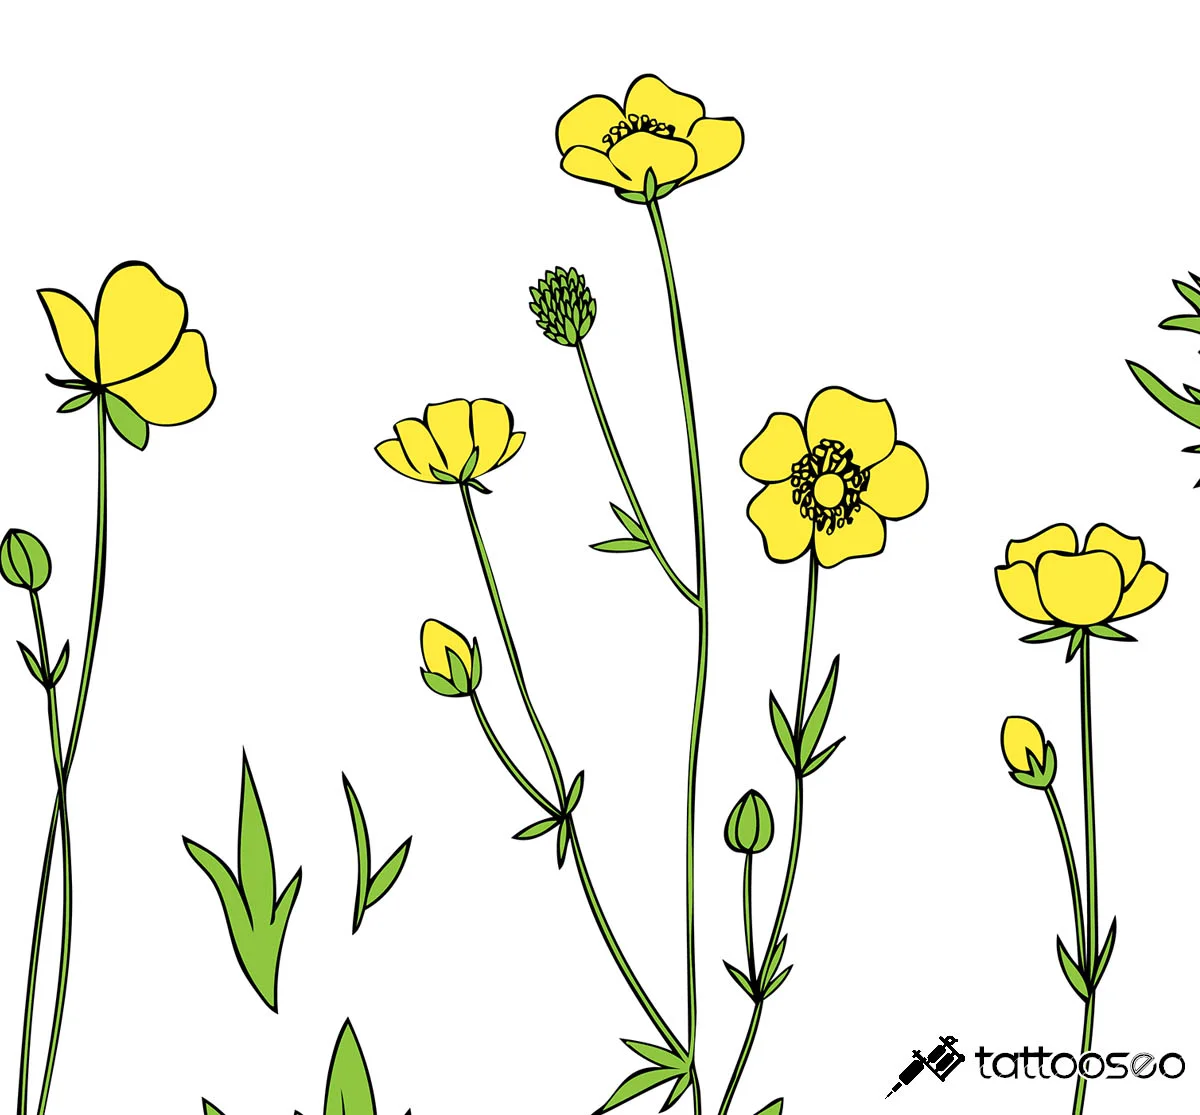 Buttercup flower tattoo meaning